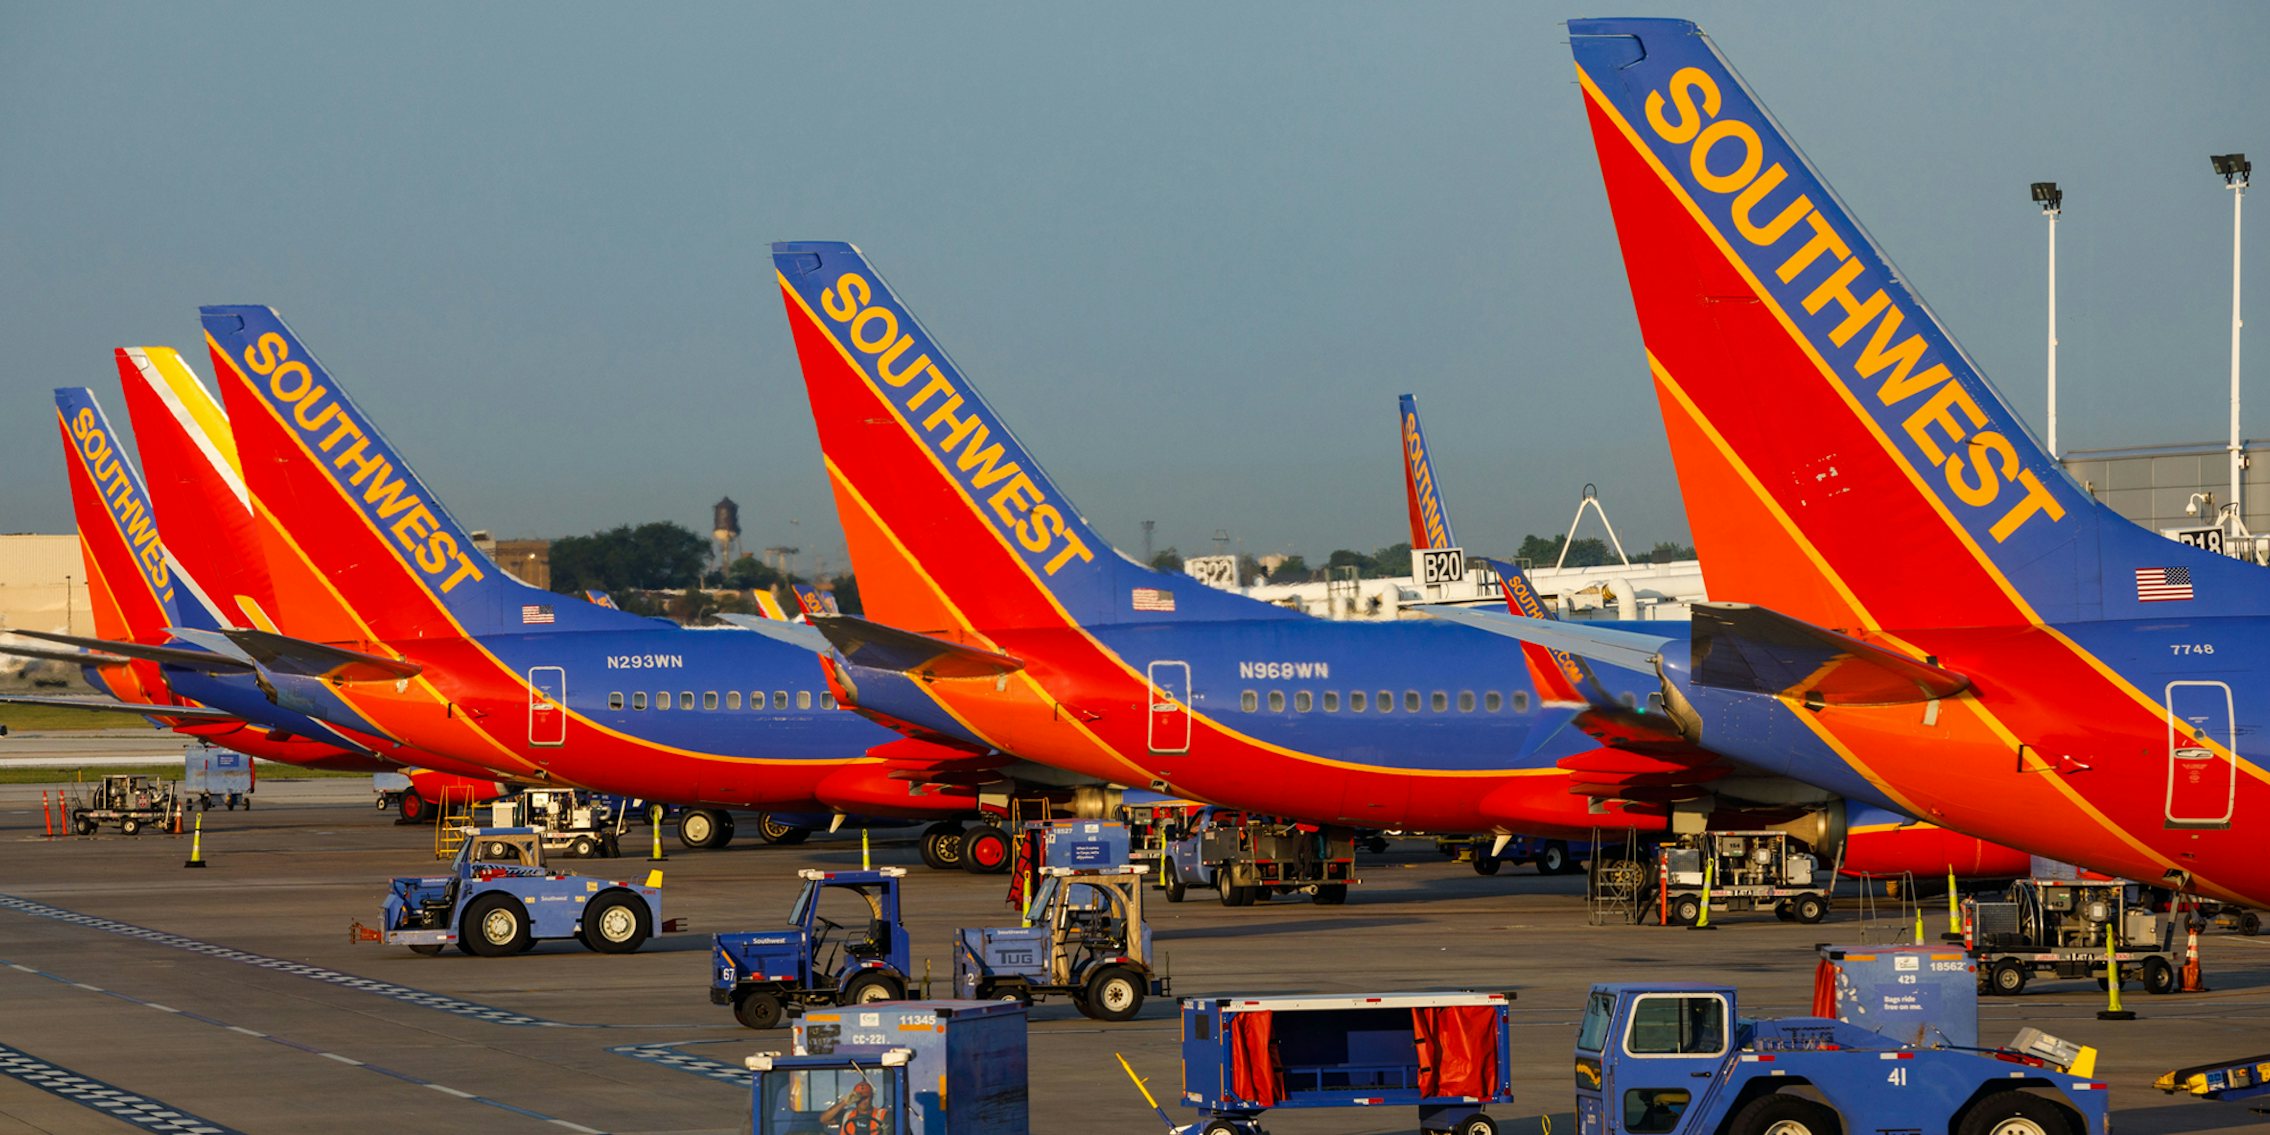 Southwest airlines planes lined up